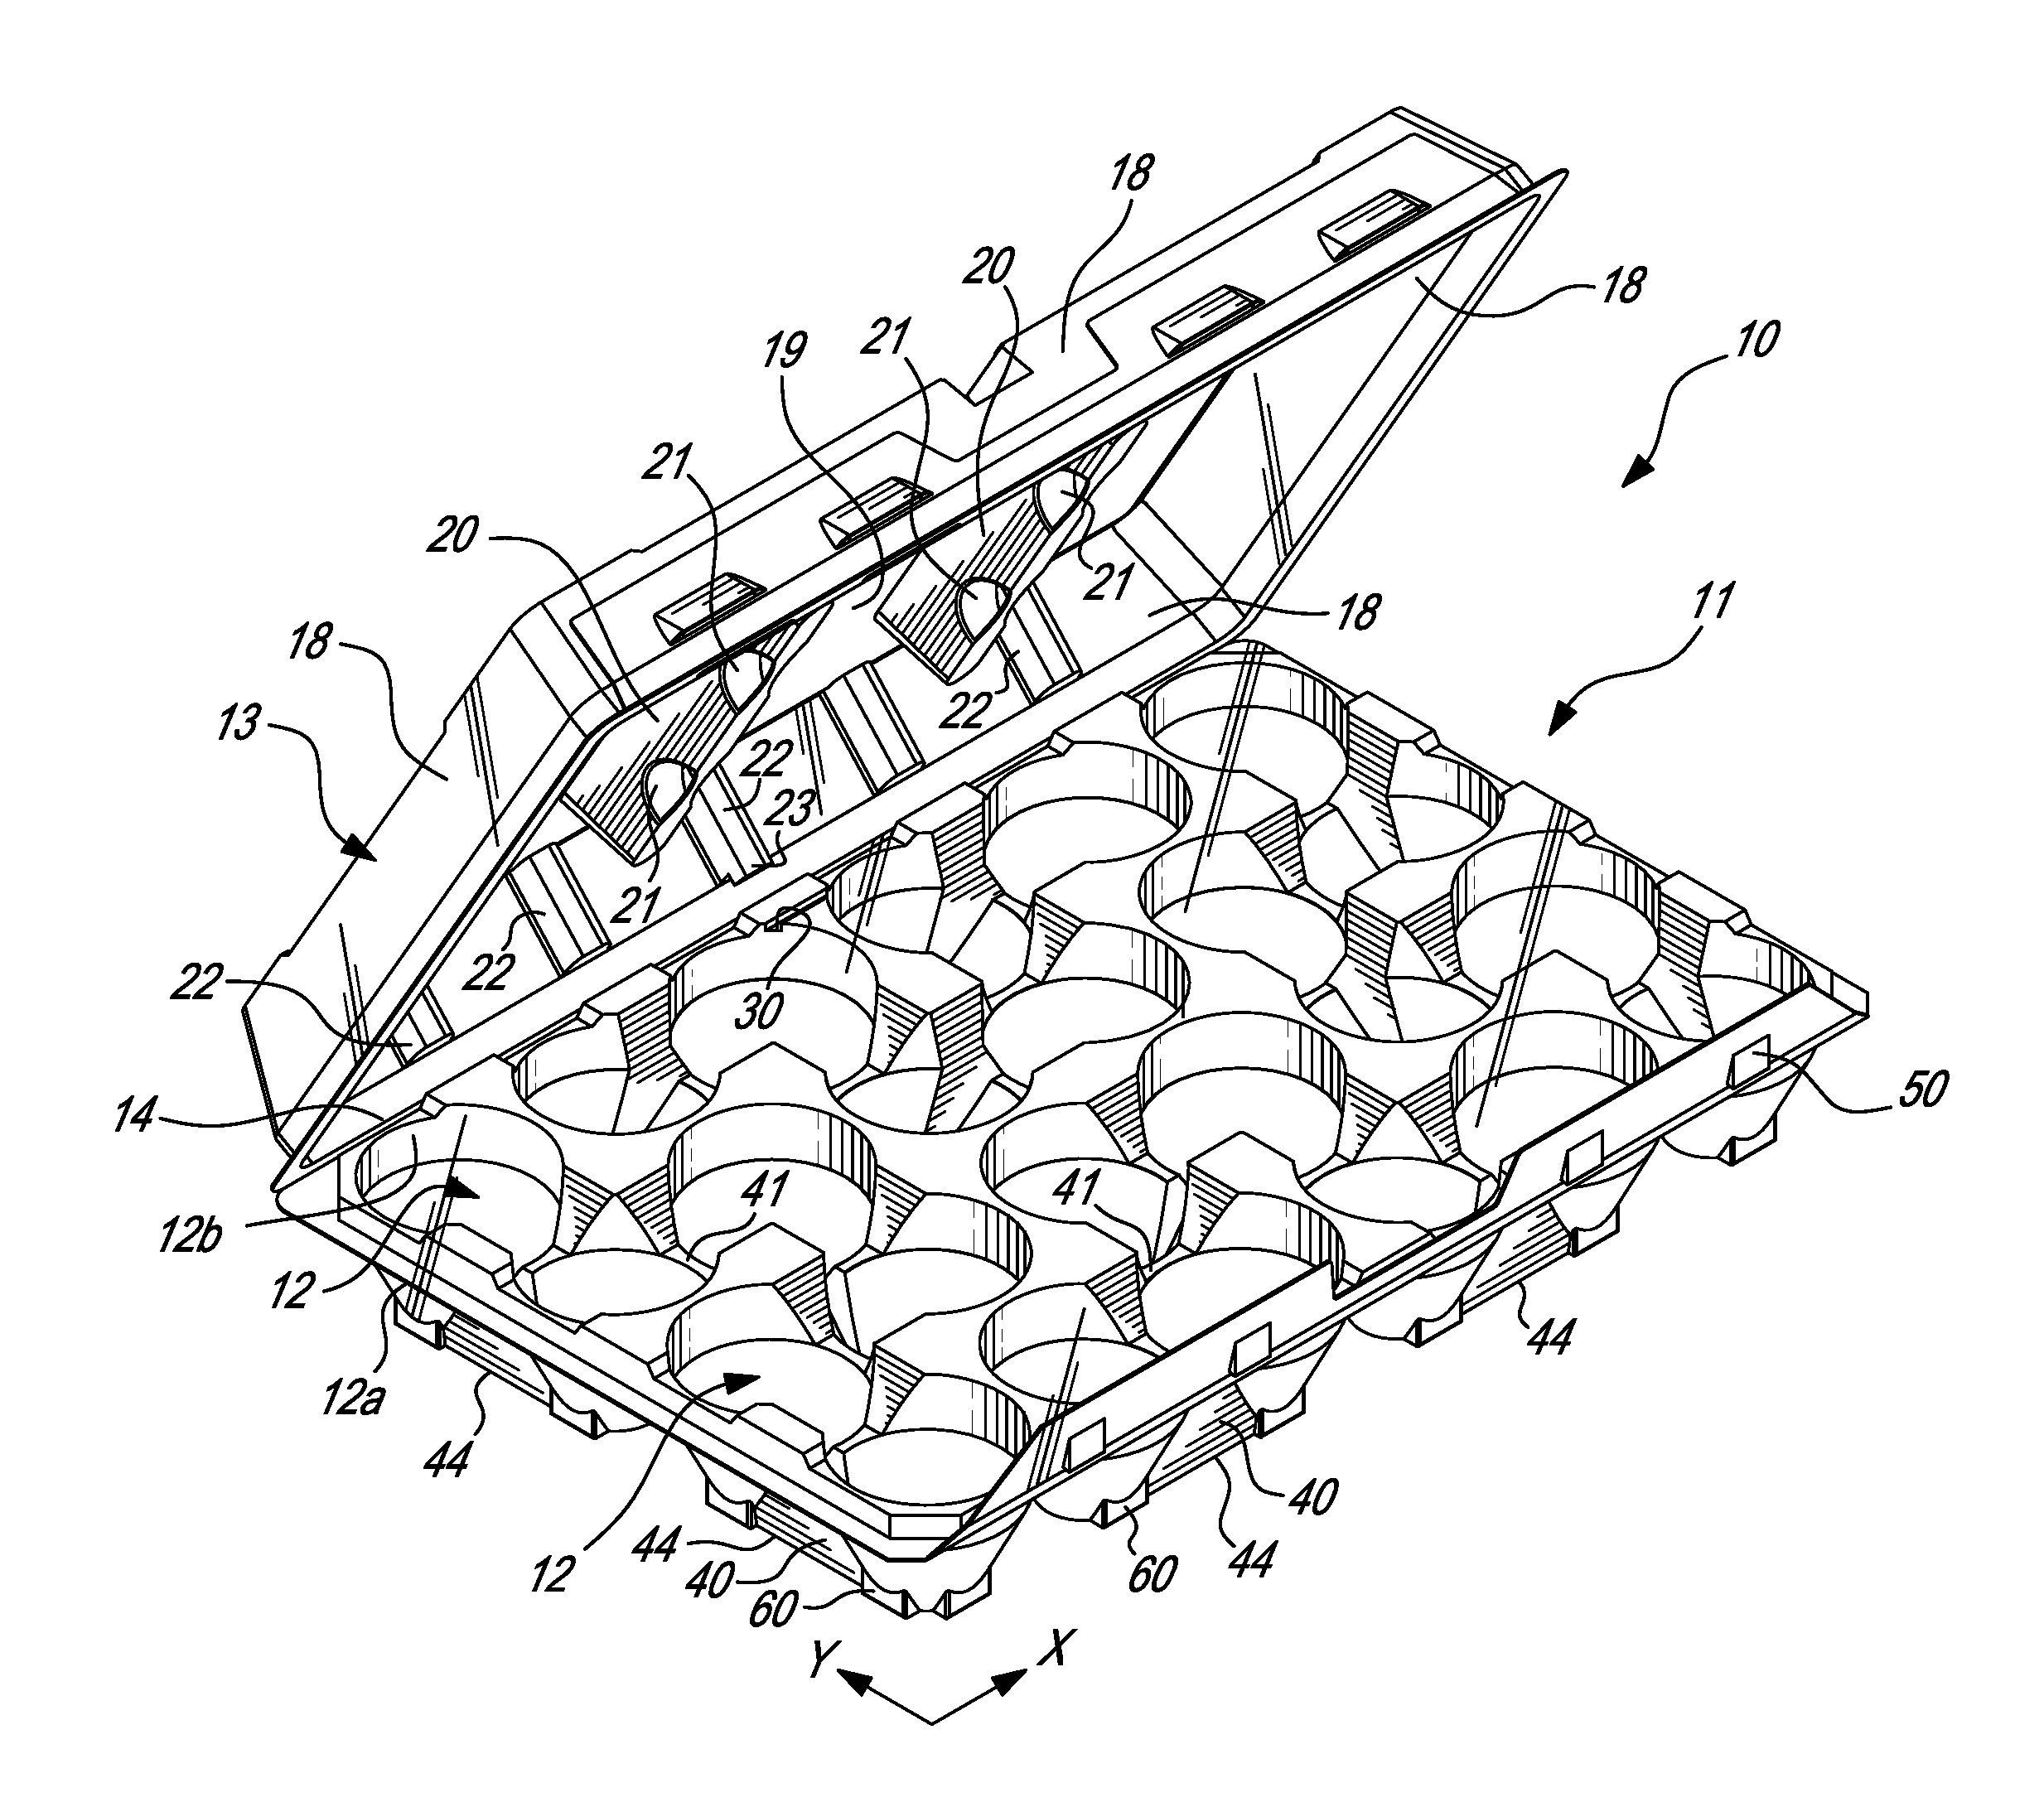 Stacking configuration for container for frangible items